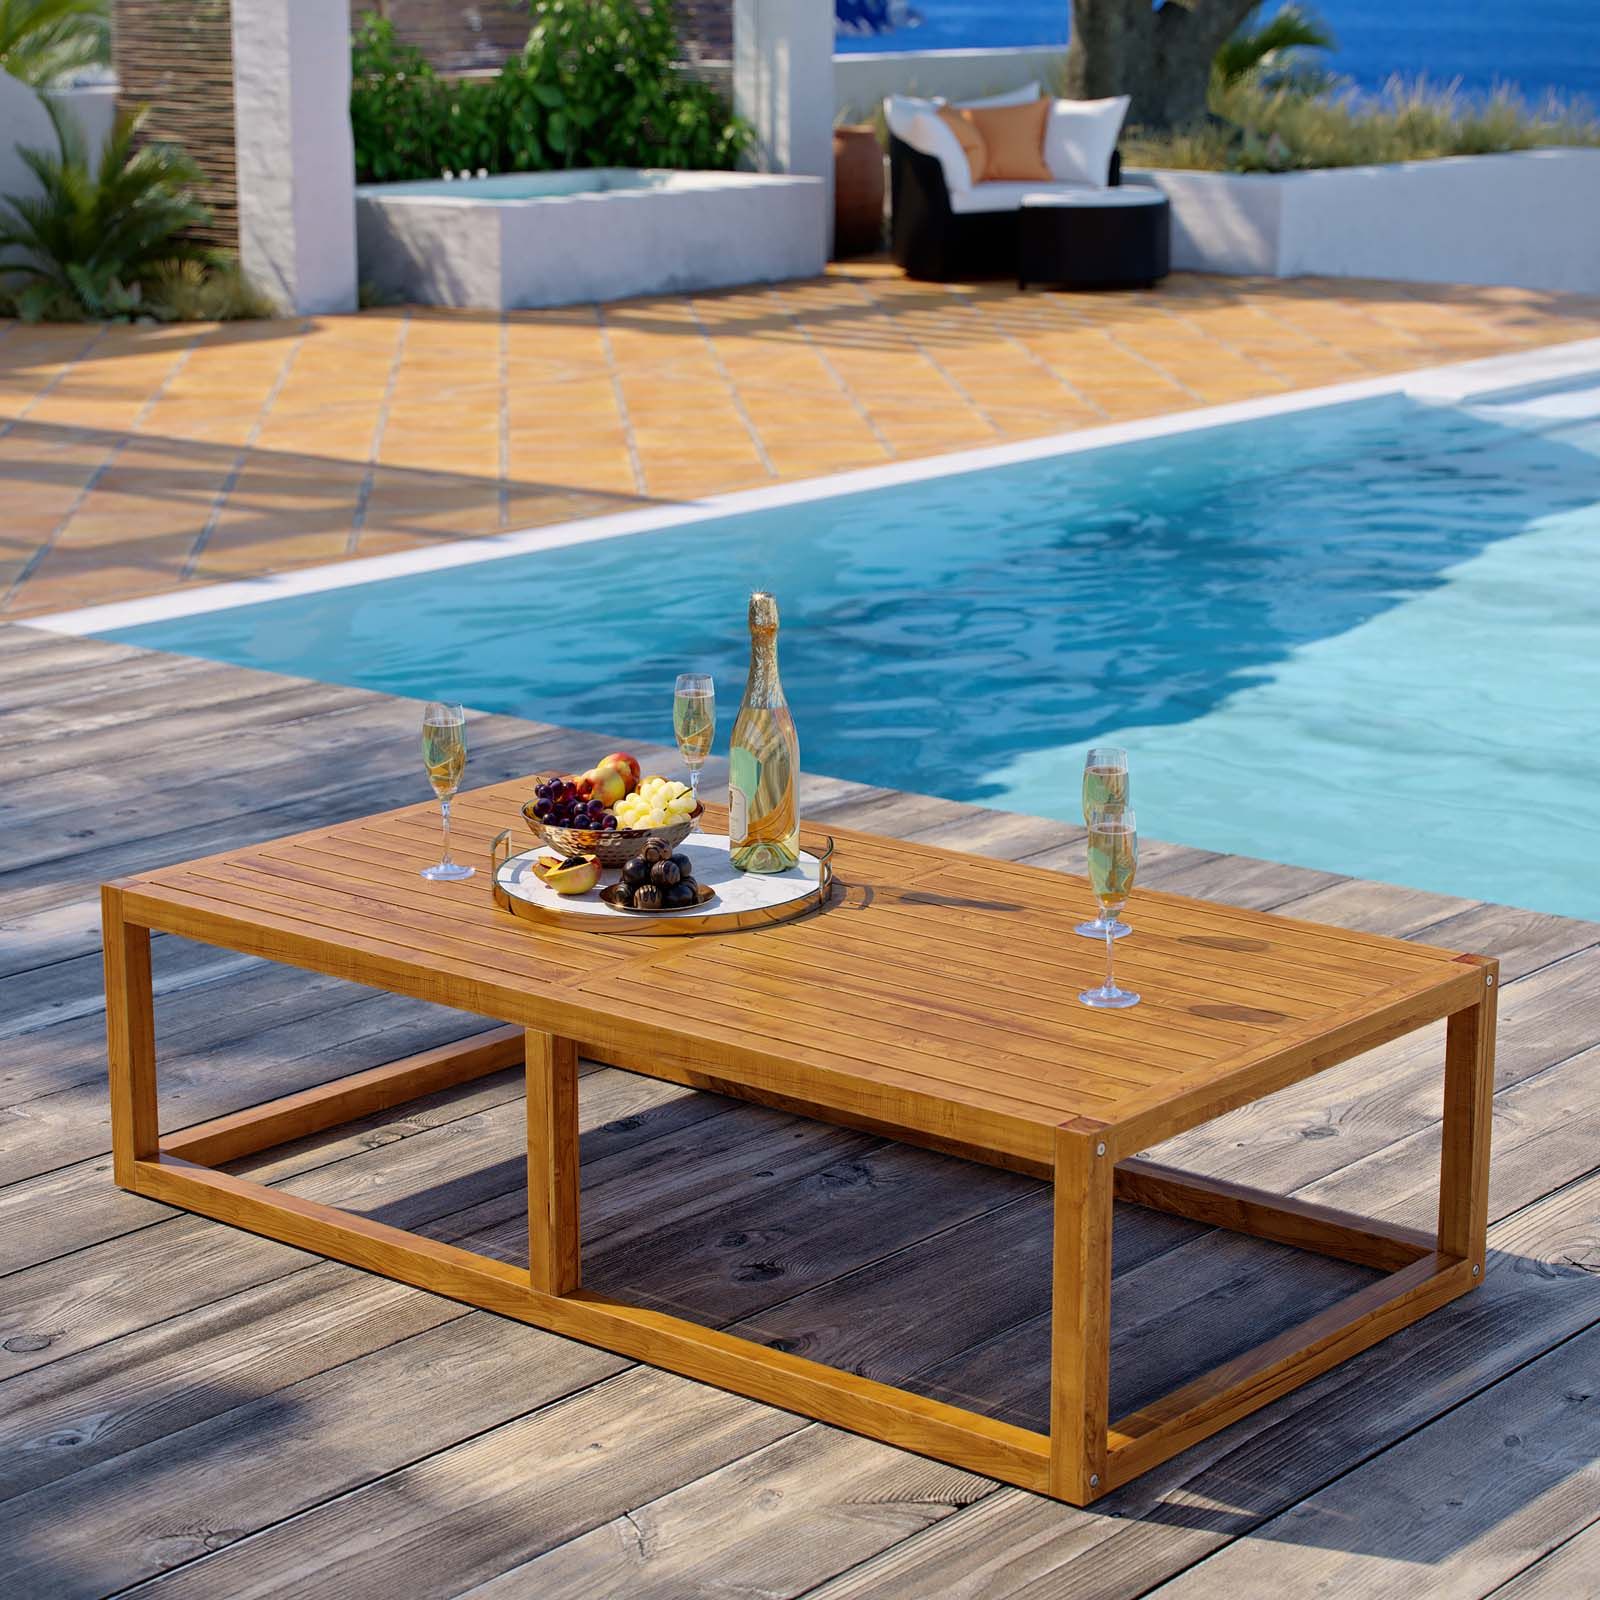 Newbury Outdoor Patio Premium Grade A Teak Wood Coffee Table Natural Within Modern Outdoor Patio Coffee Tables (Gallery 15 of 20)